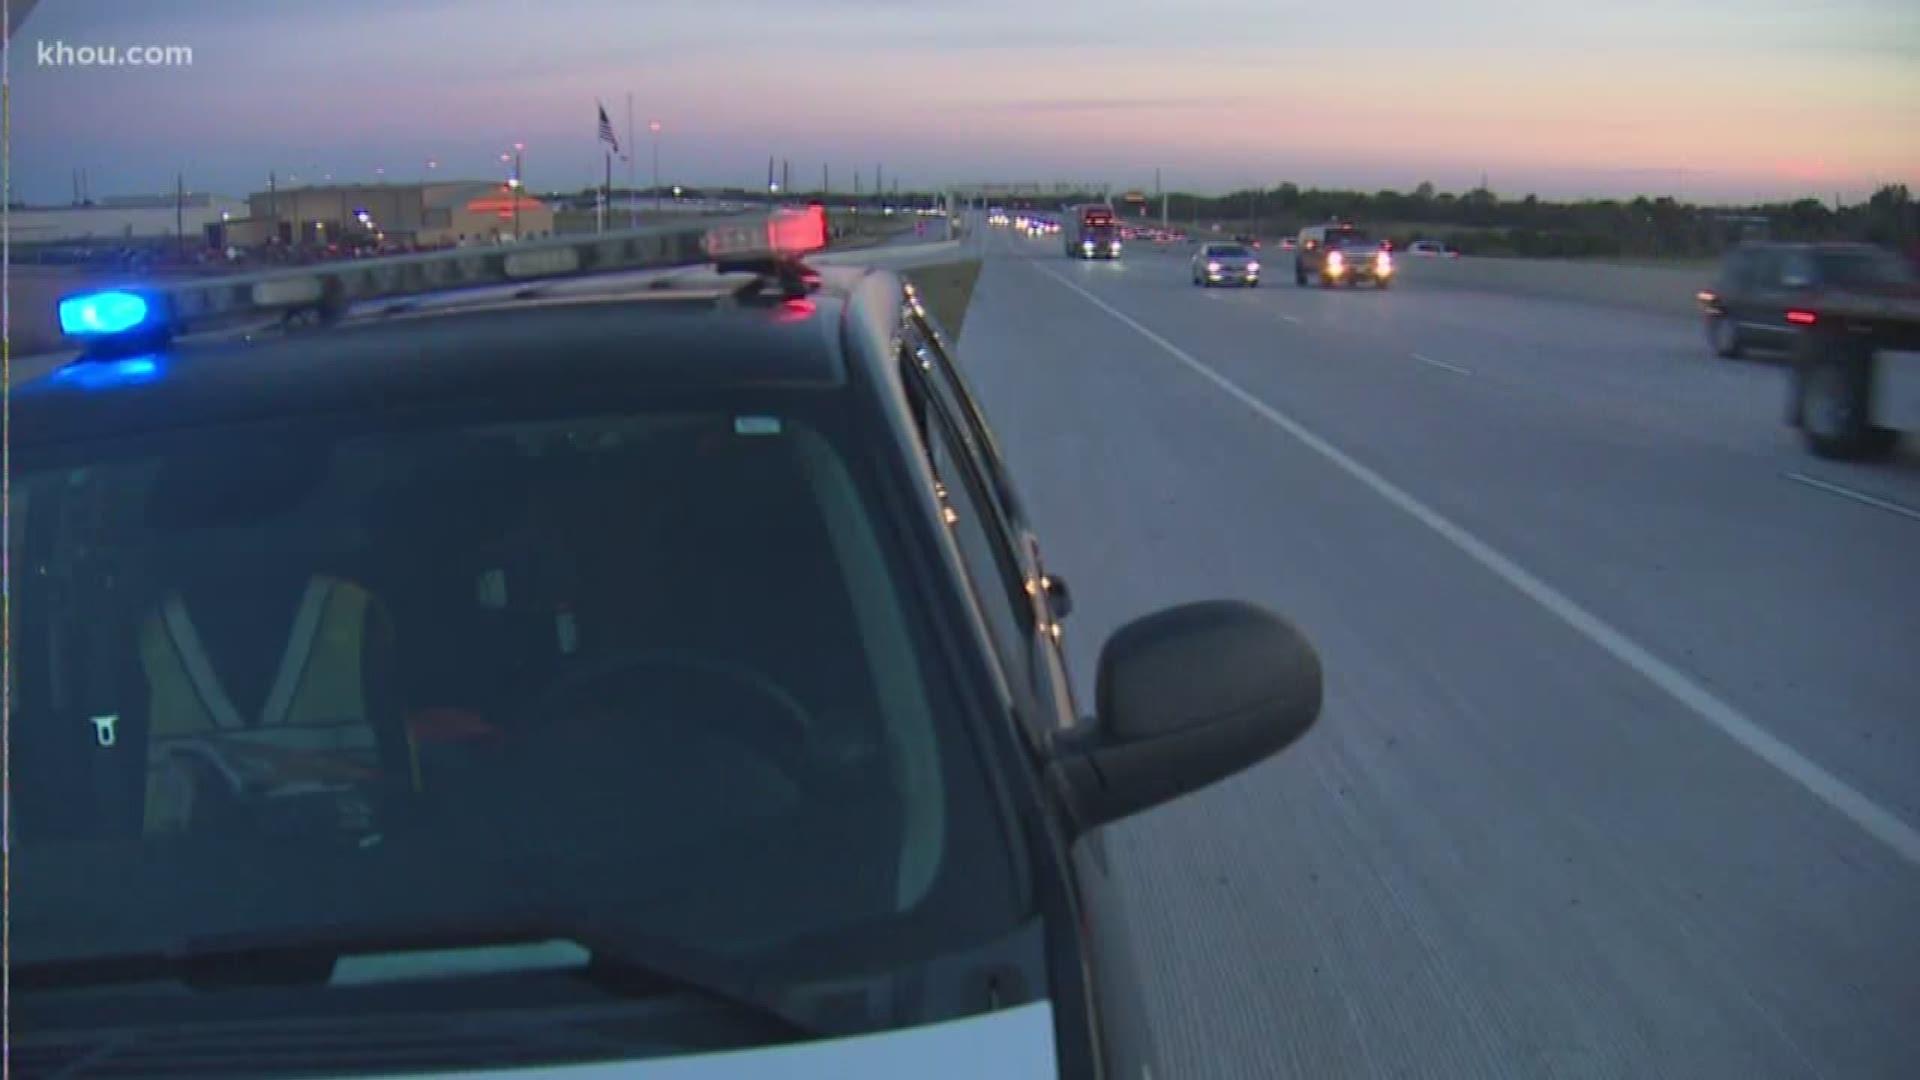 Texas troopers are cracking down on drivers who don't move over a lane or slow down when approaching emergency vehicles stopped on the side of the road.